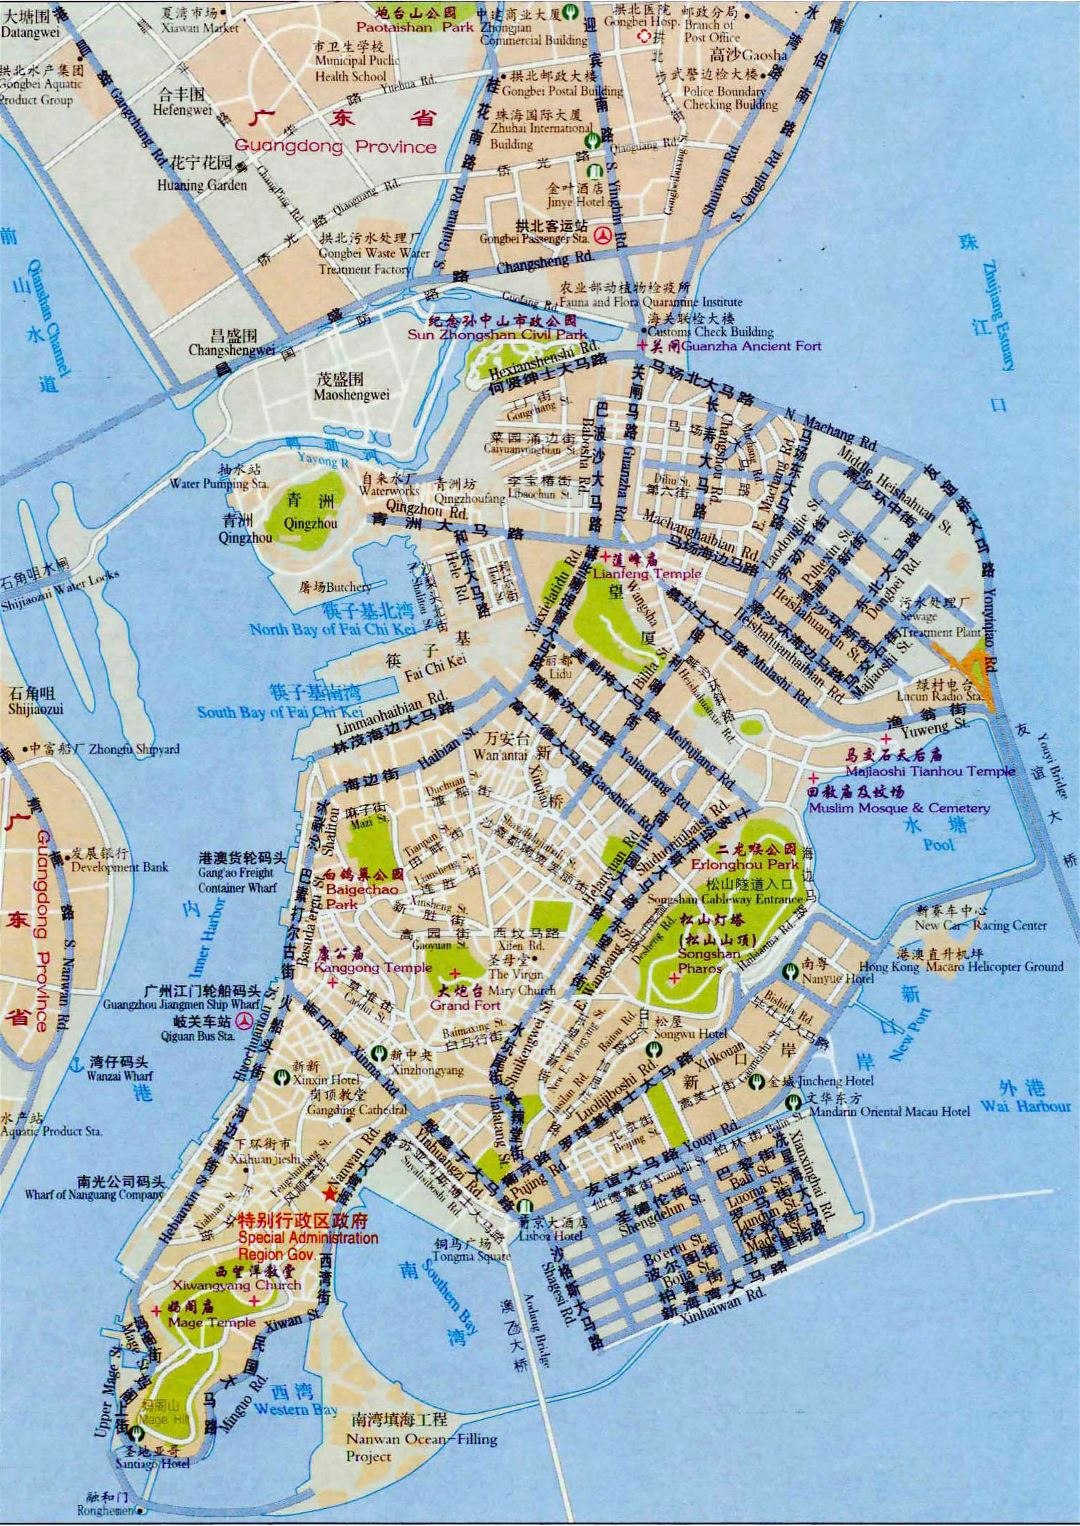 Large road map of Macau in chinese